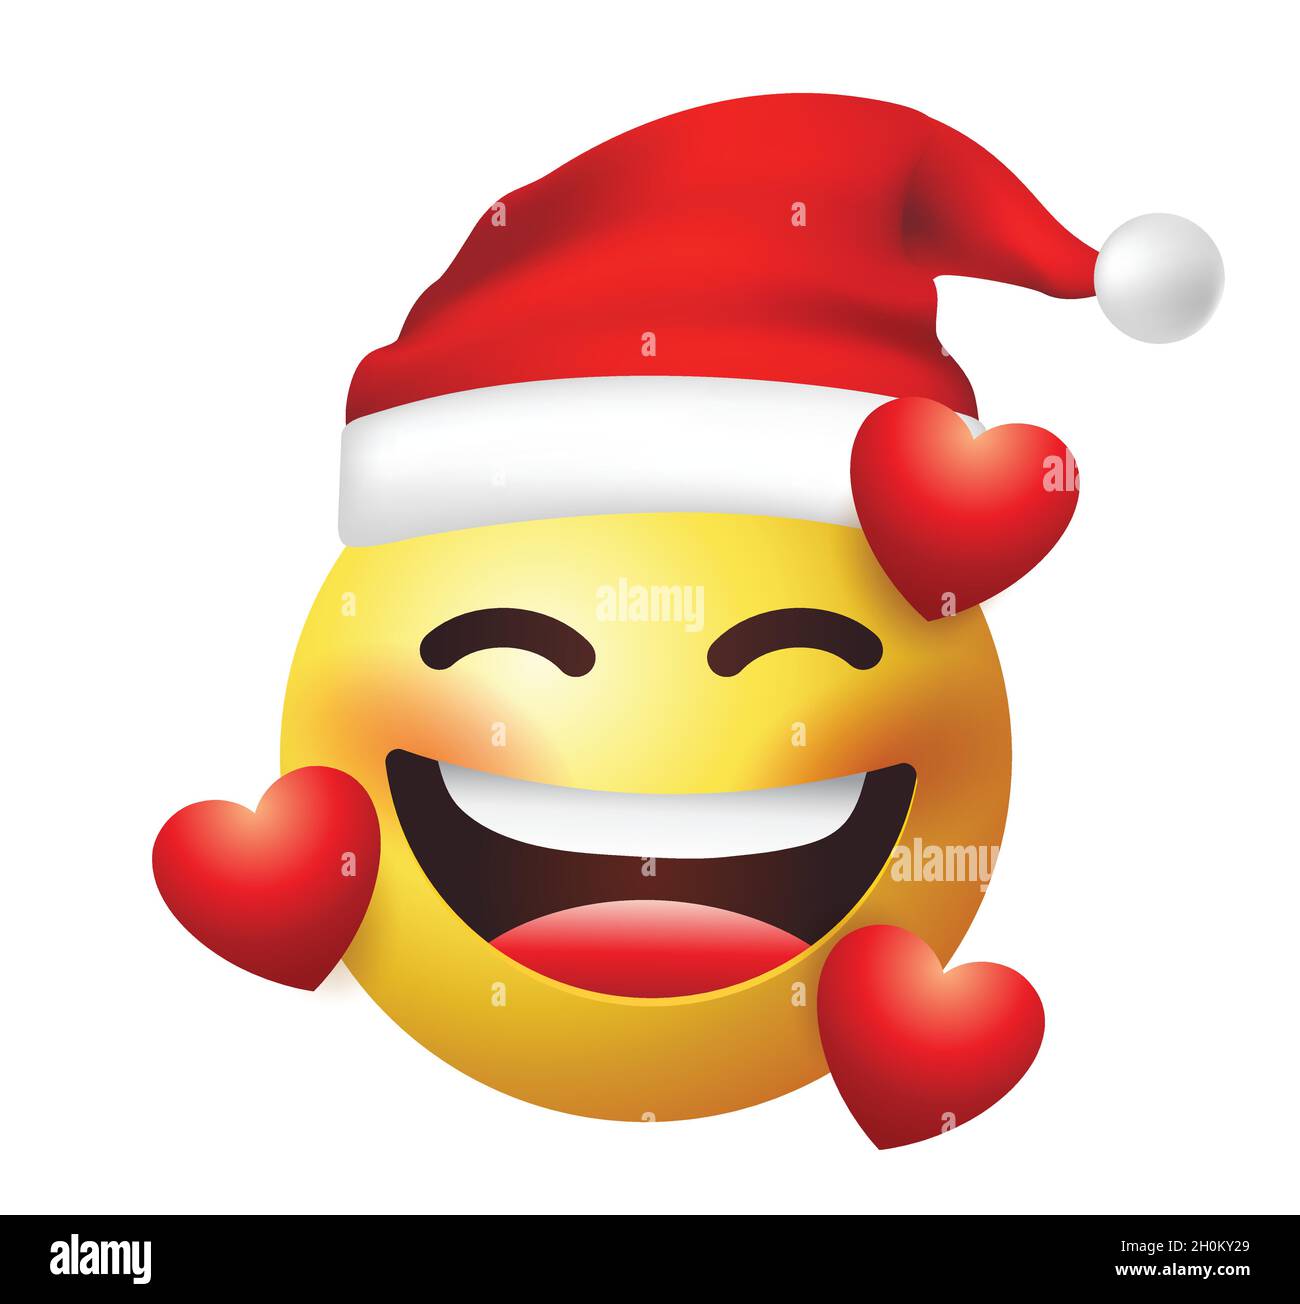 High quality emoticon on white background. Santa Claus emoji blushing in love with red hearts. Yellow face emoji in love with closed eyes. Xmas emoji. Stock Vector